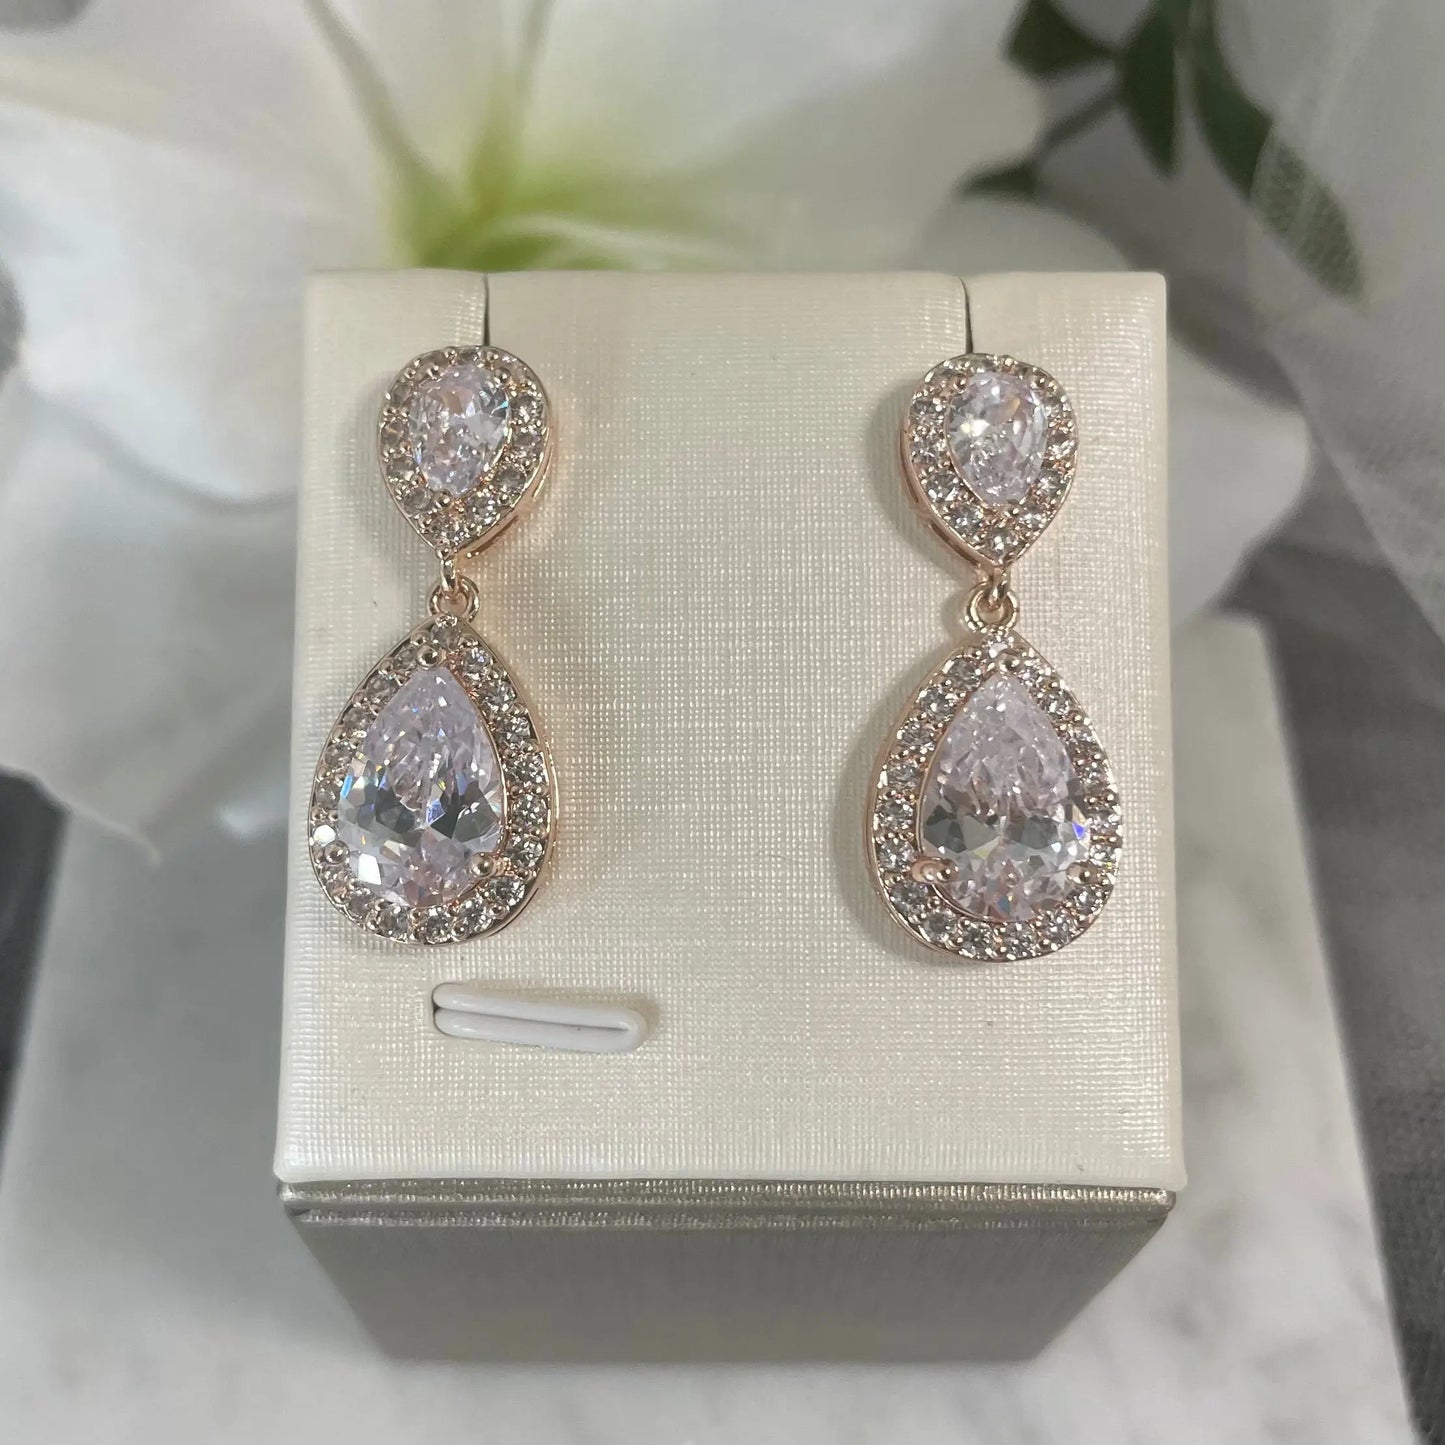 Leona Earrings (Rose Gold): Elegant rose gold earrings with a large CZ stone surrounded by smaller CZs, offering a sophisticated drop design.